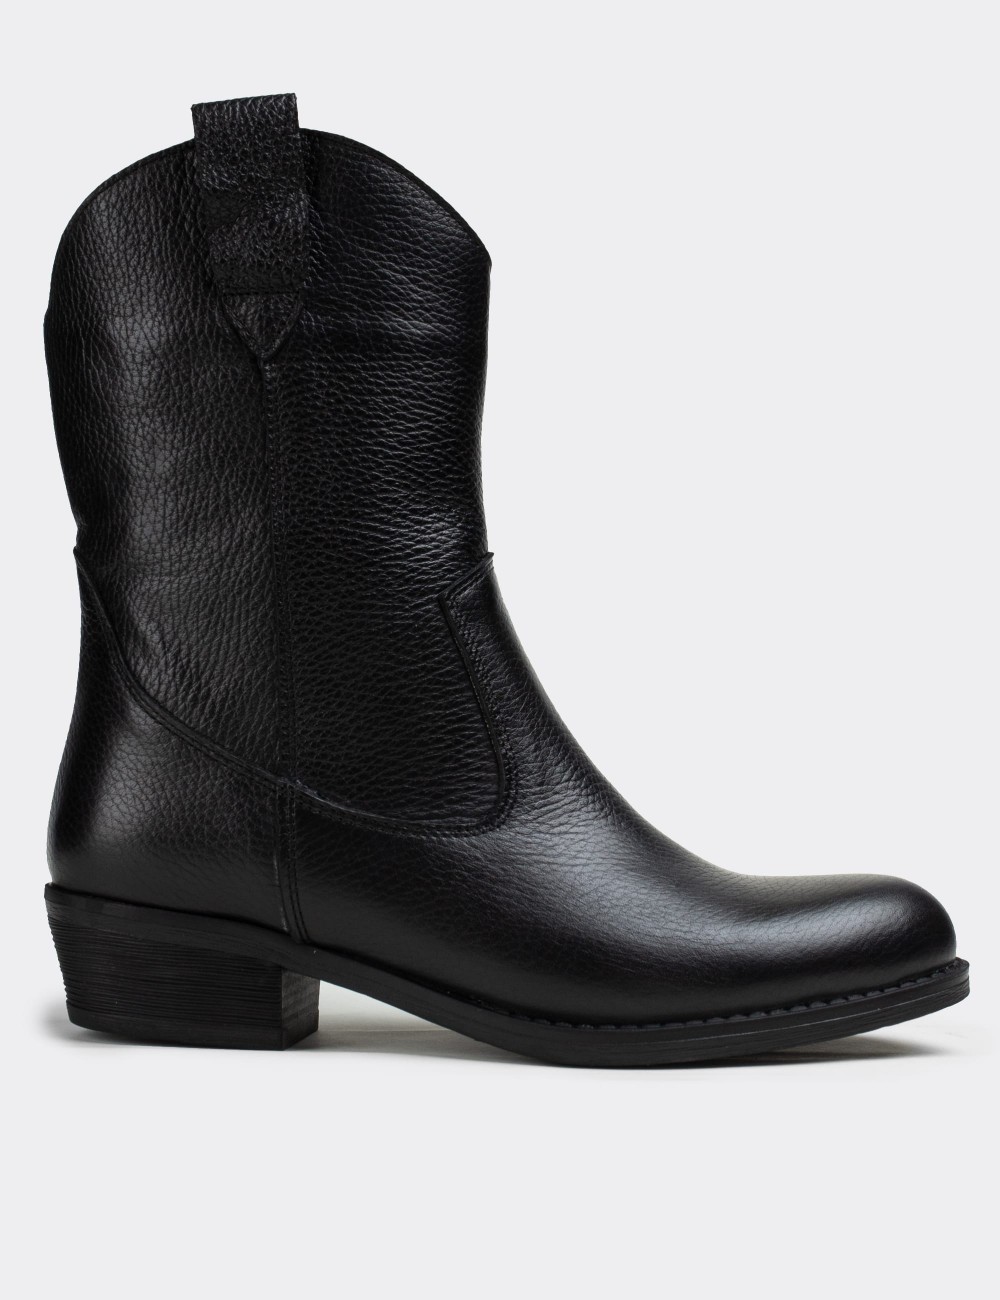 Black  Leather Wester Boots - E4468ZSYHC01